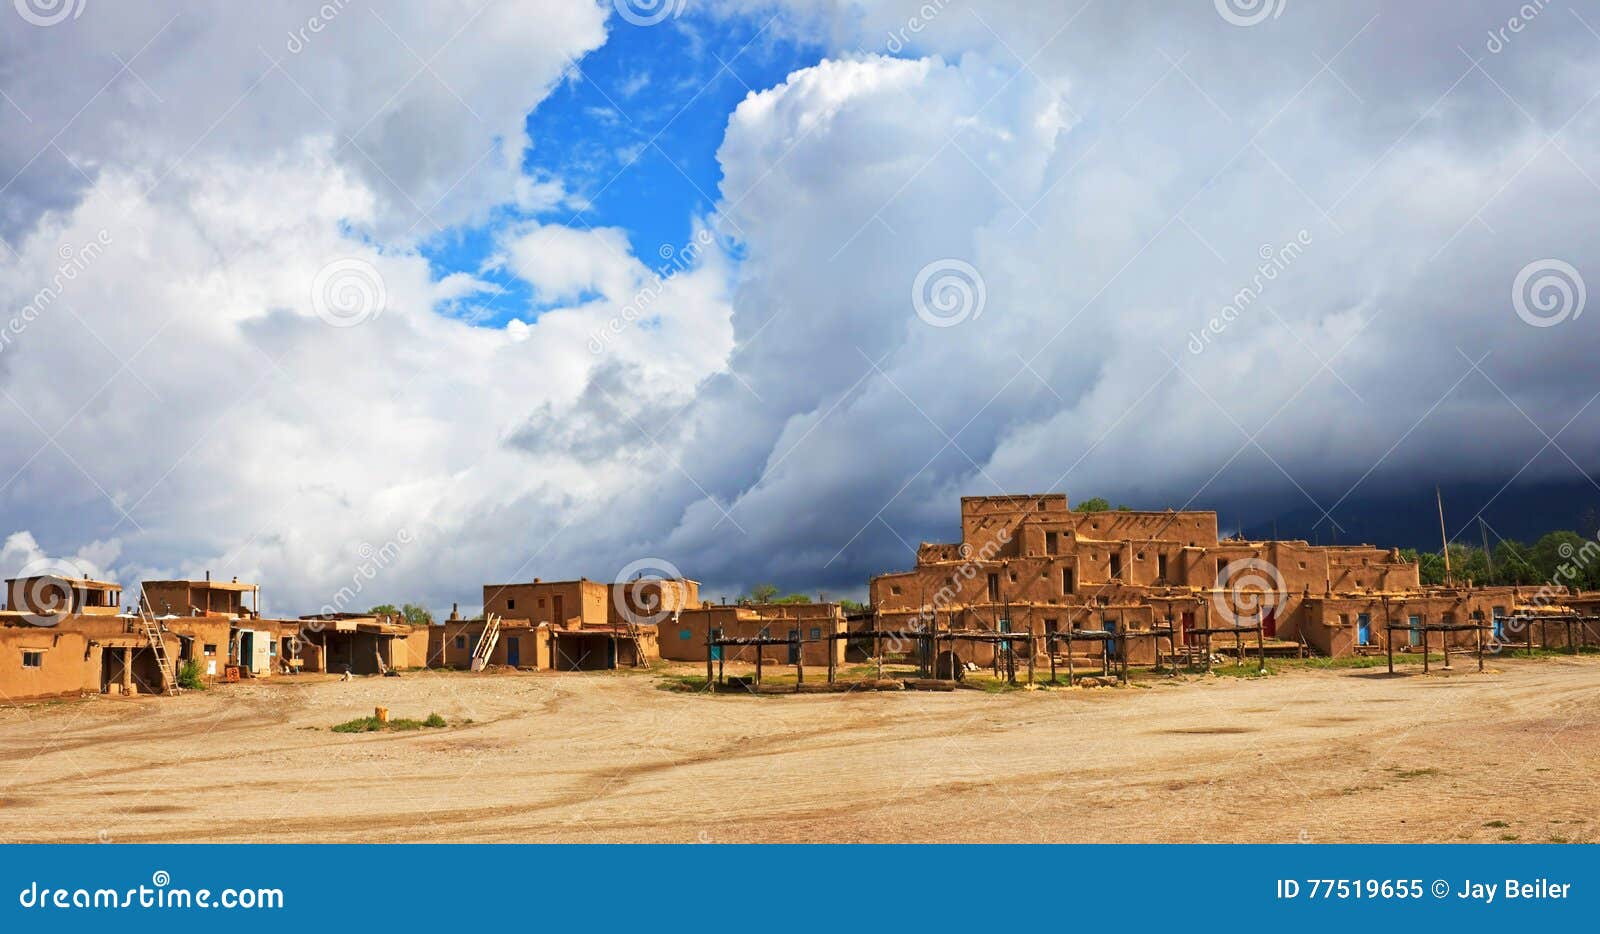 taos pueblo with dramatic clouds, new mexico